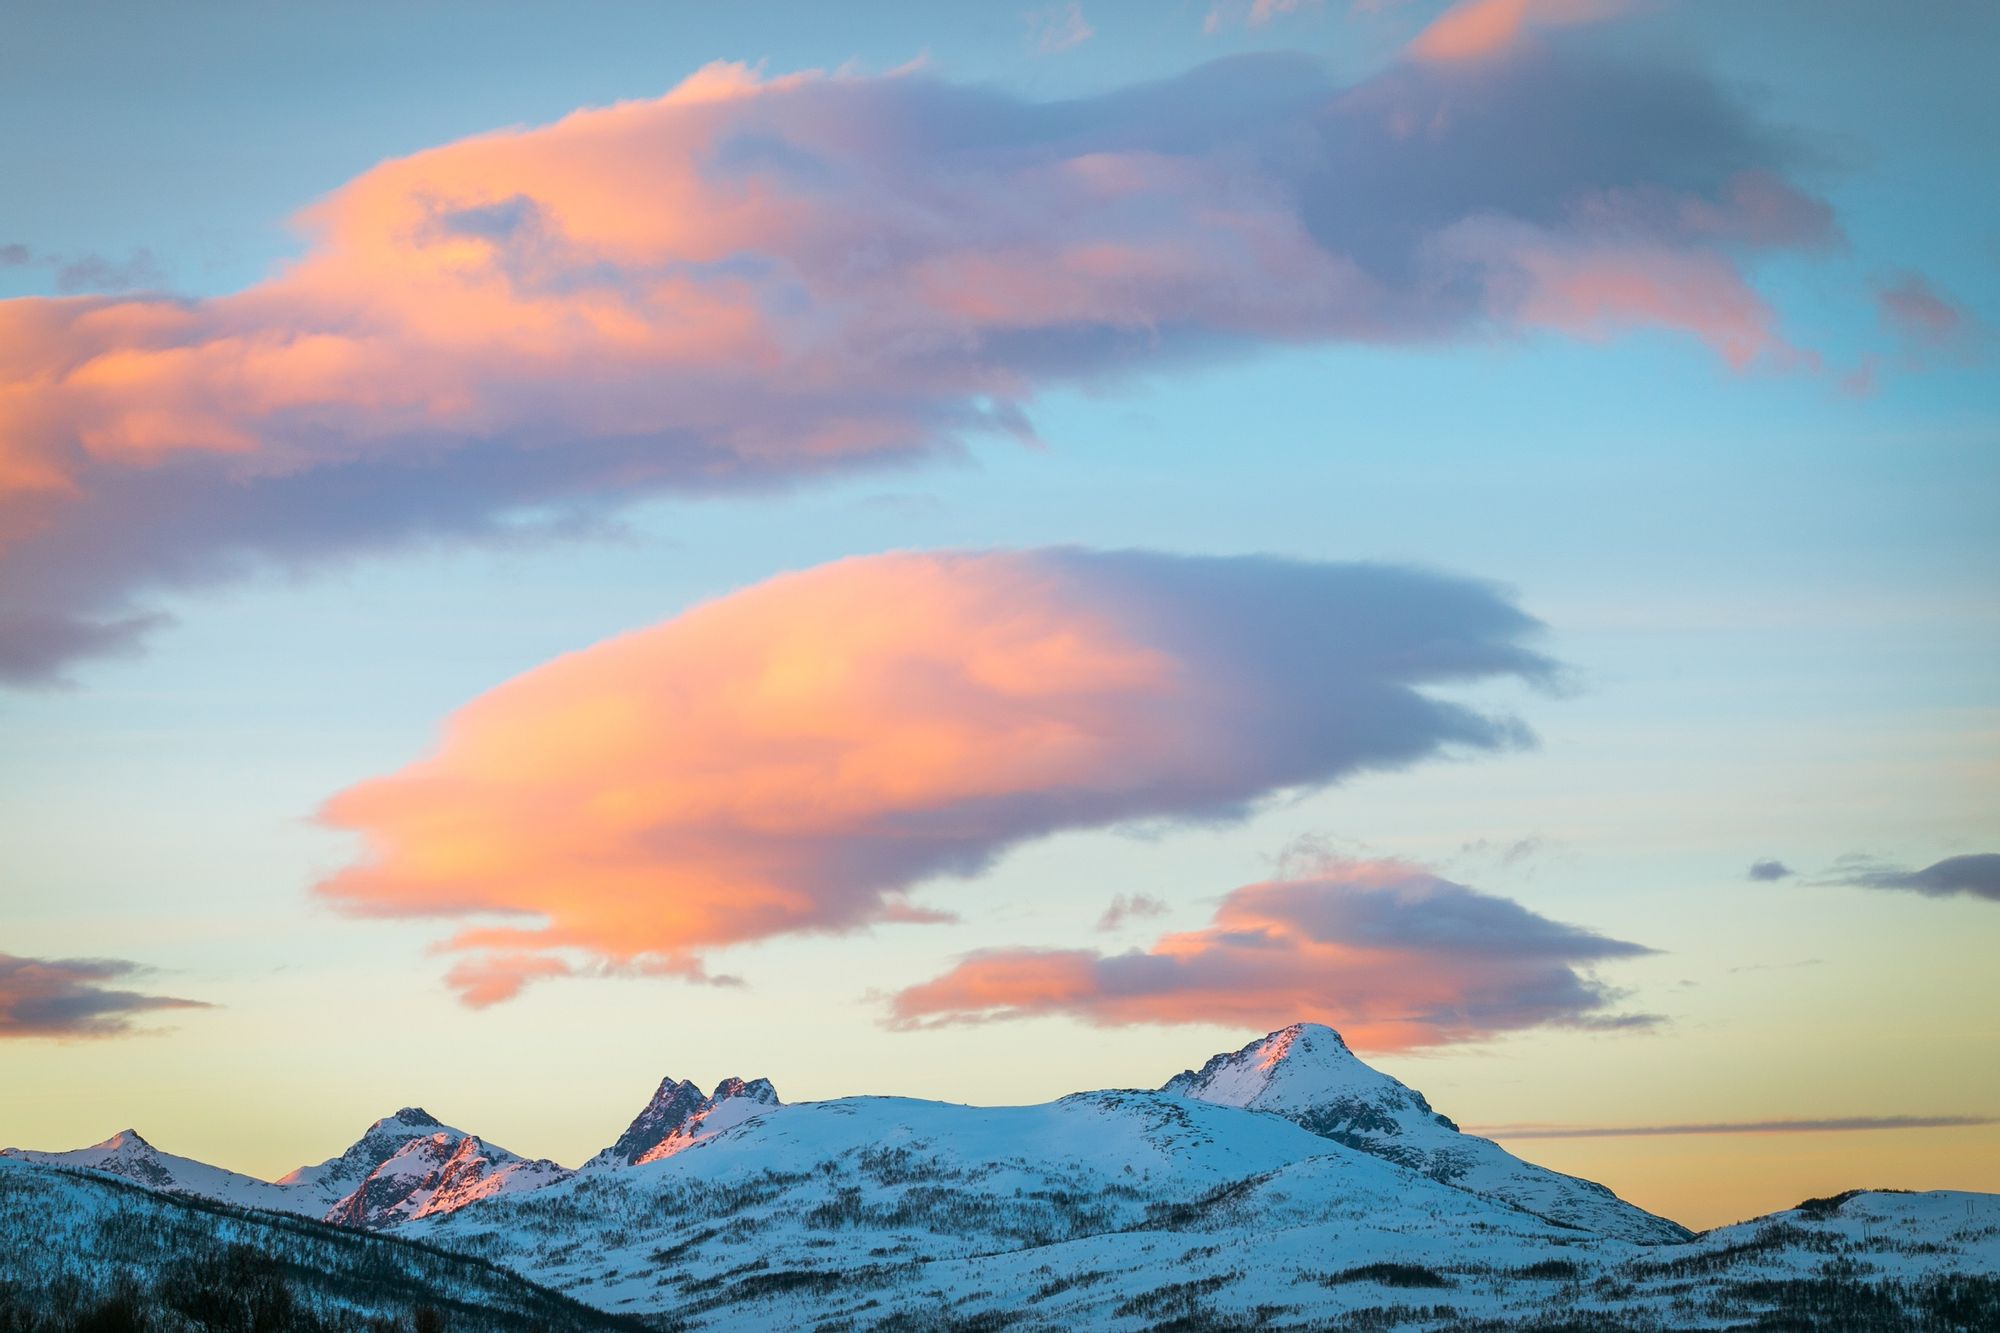 The snowy mountains of Tromso, tinted pink by the setting sun